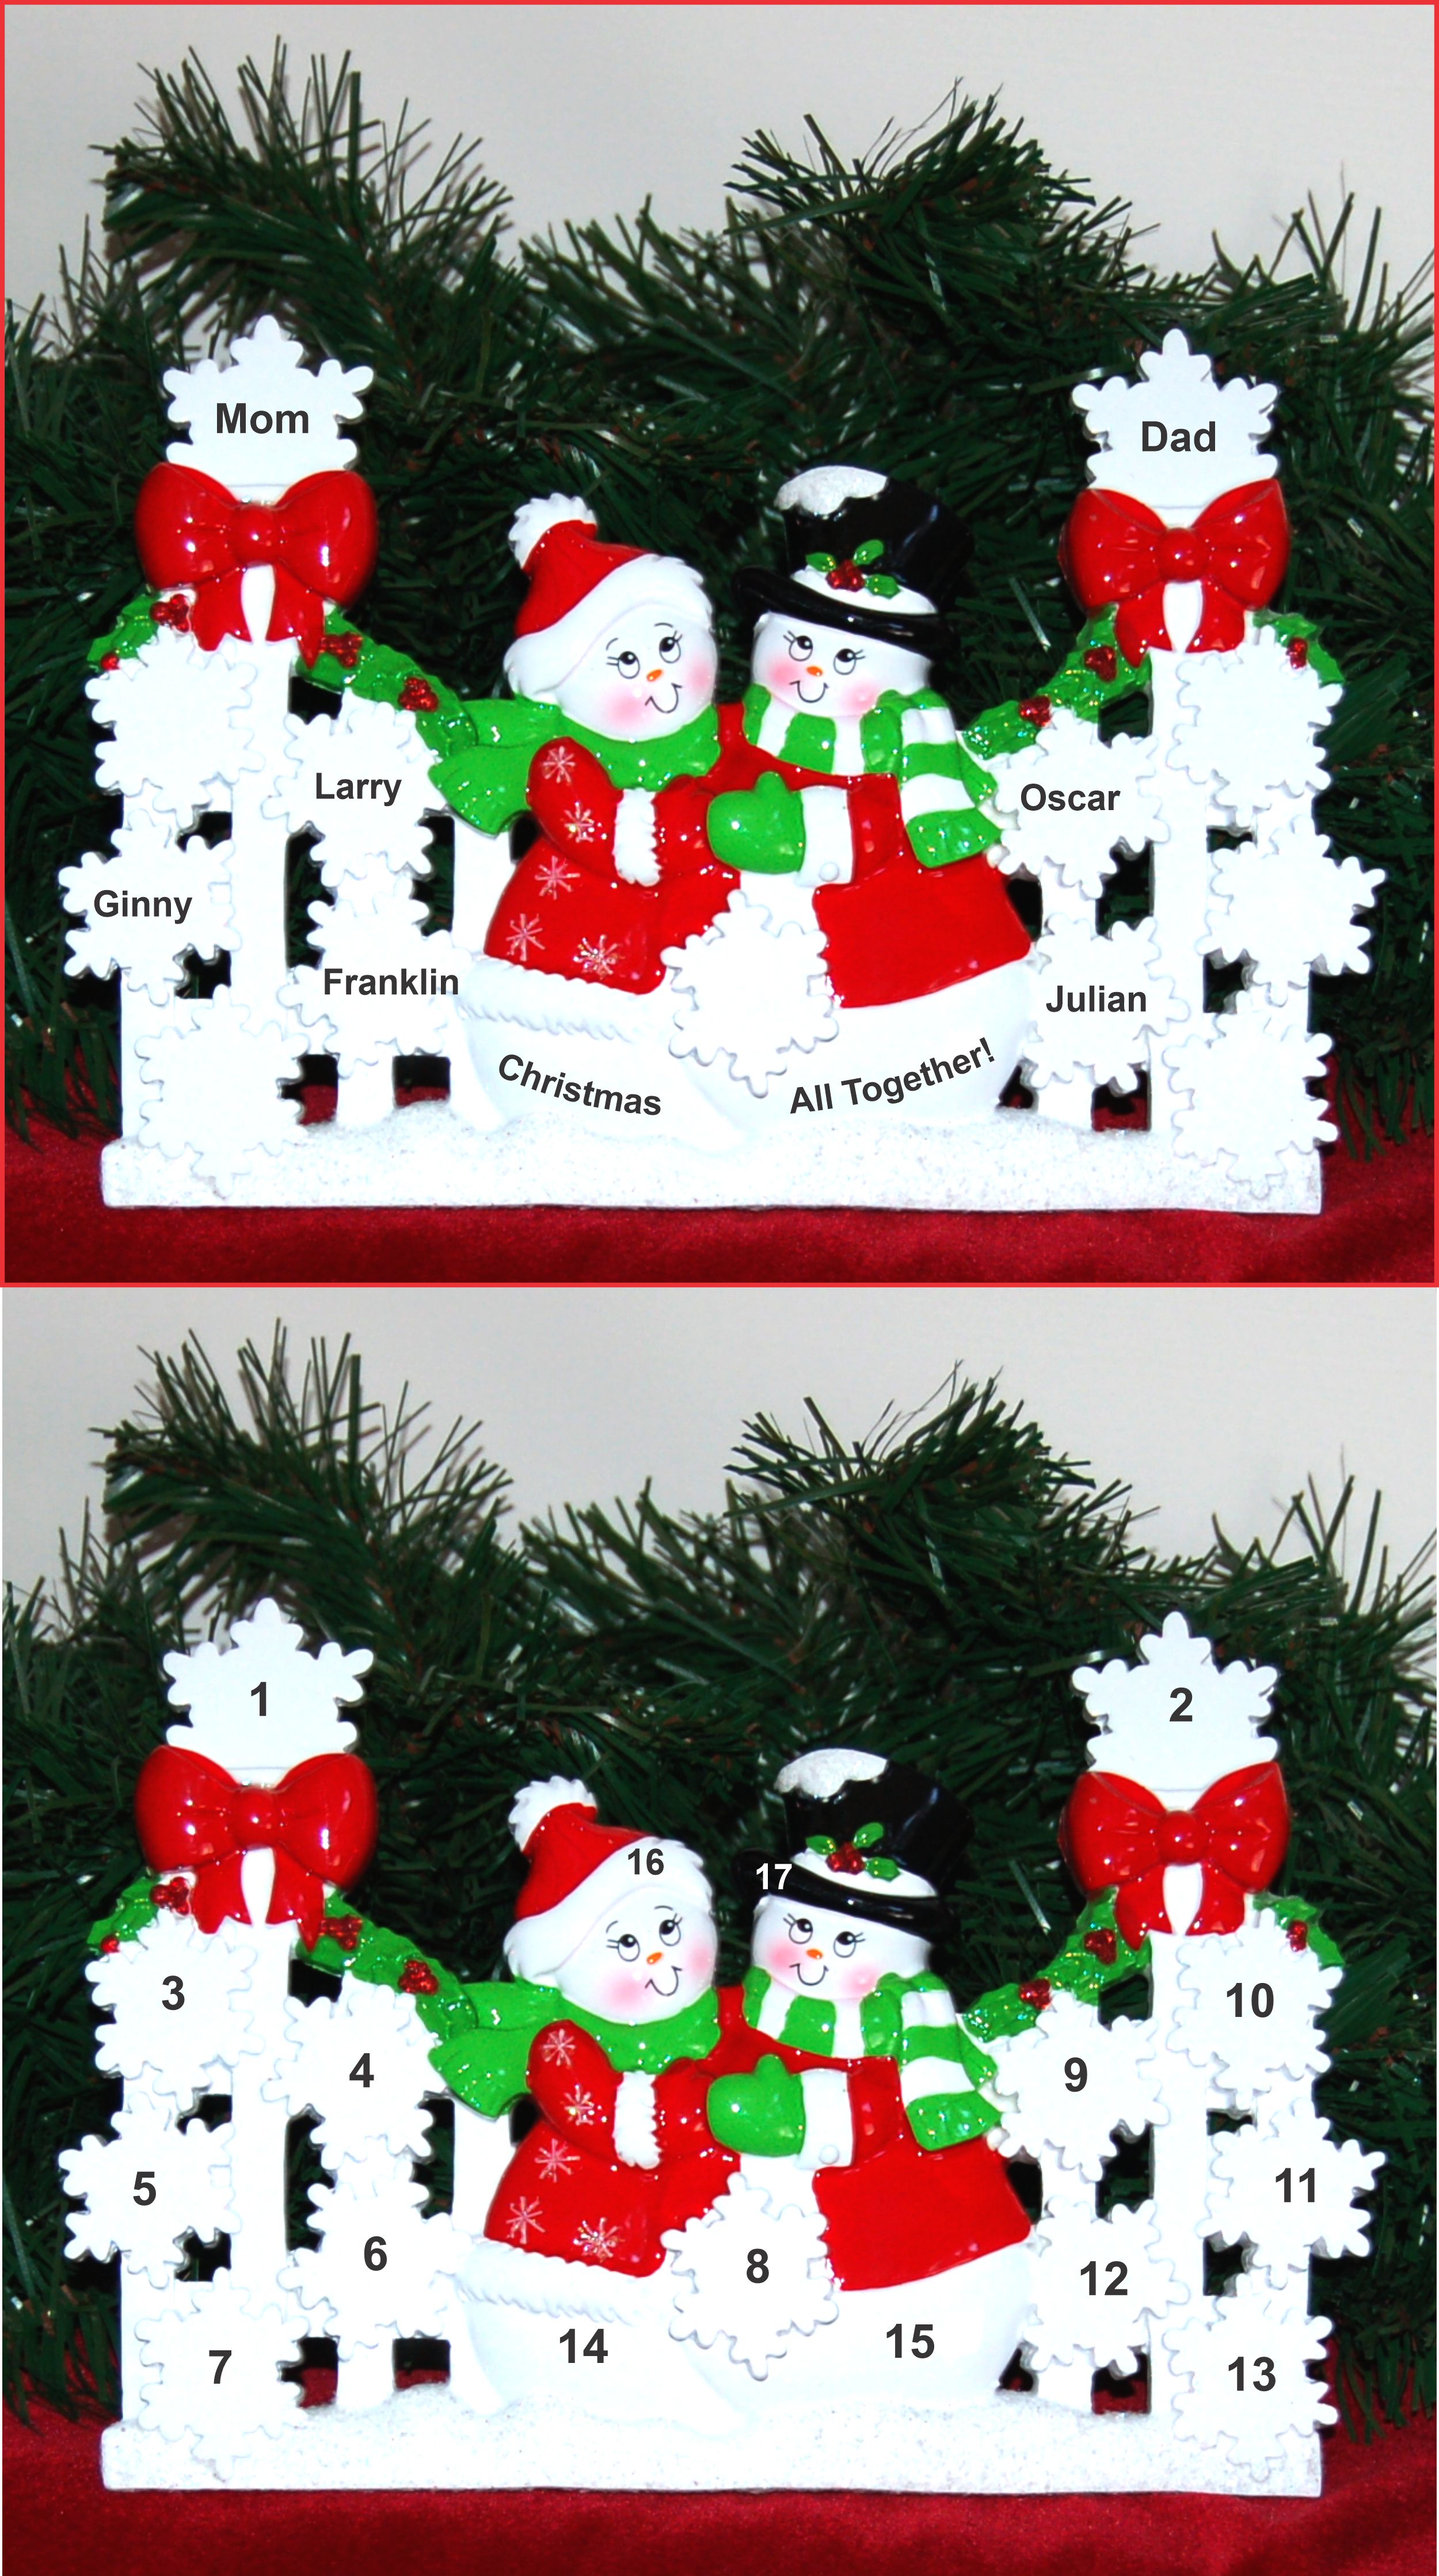 Family Tabletop Christmas Decoration Snowflakes Family of 7 Personalized by RussellRhodes.com